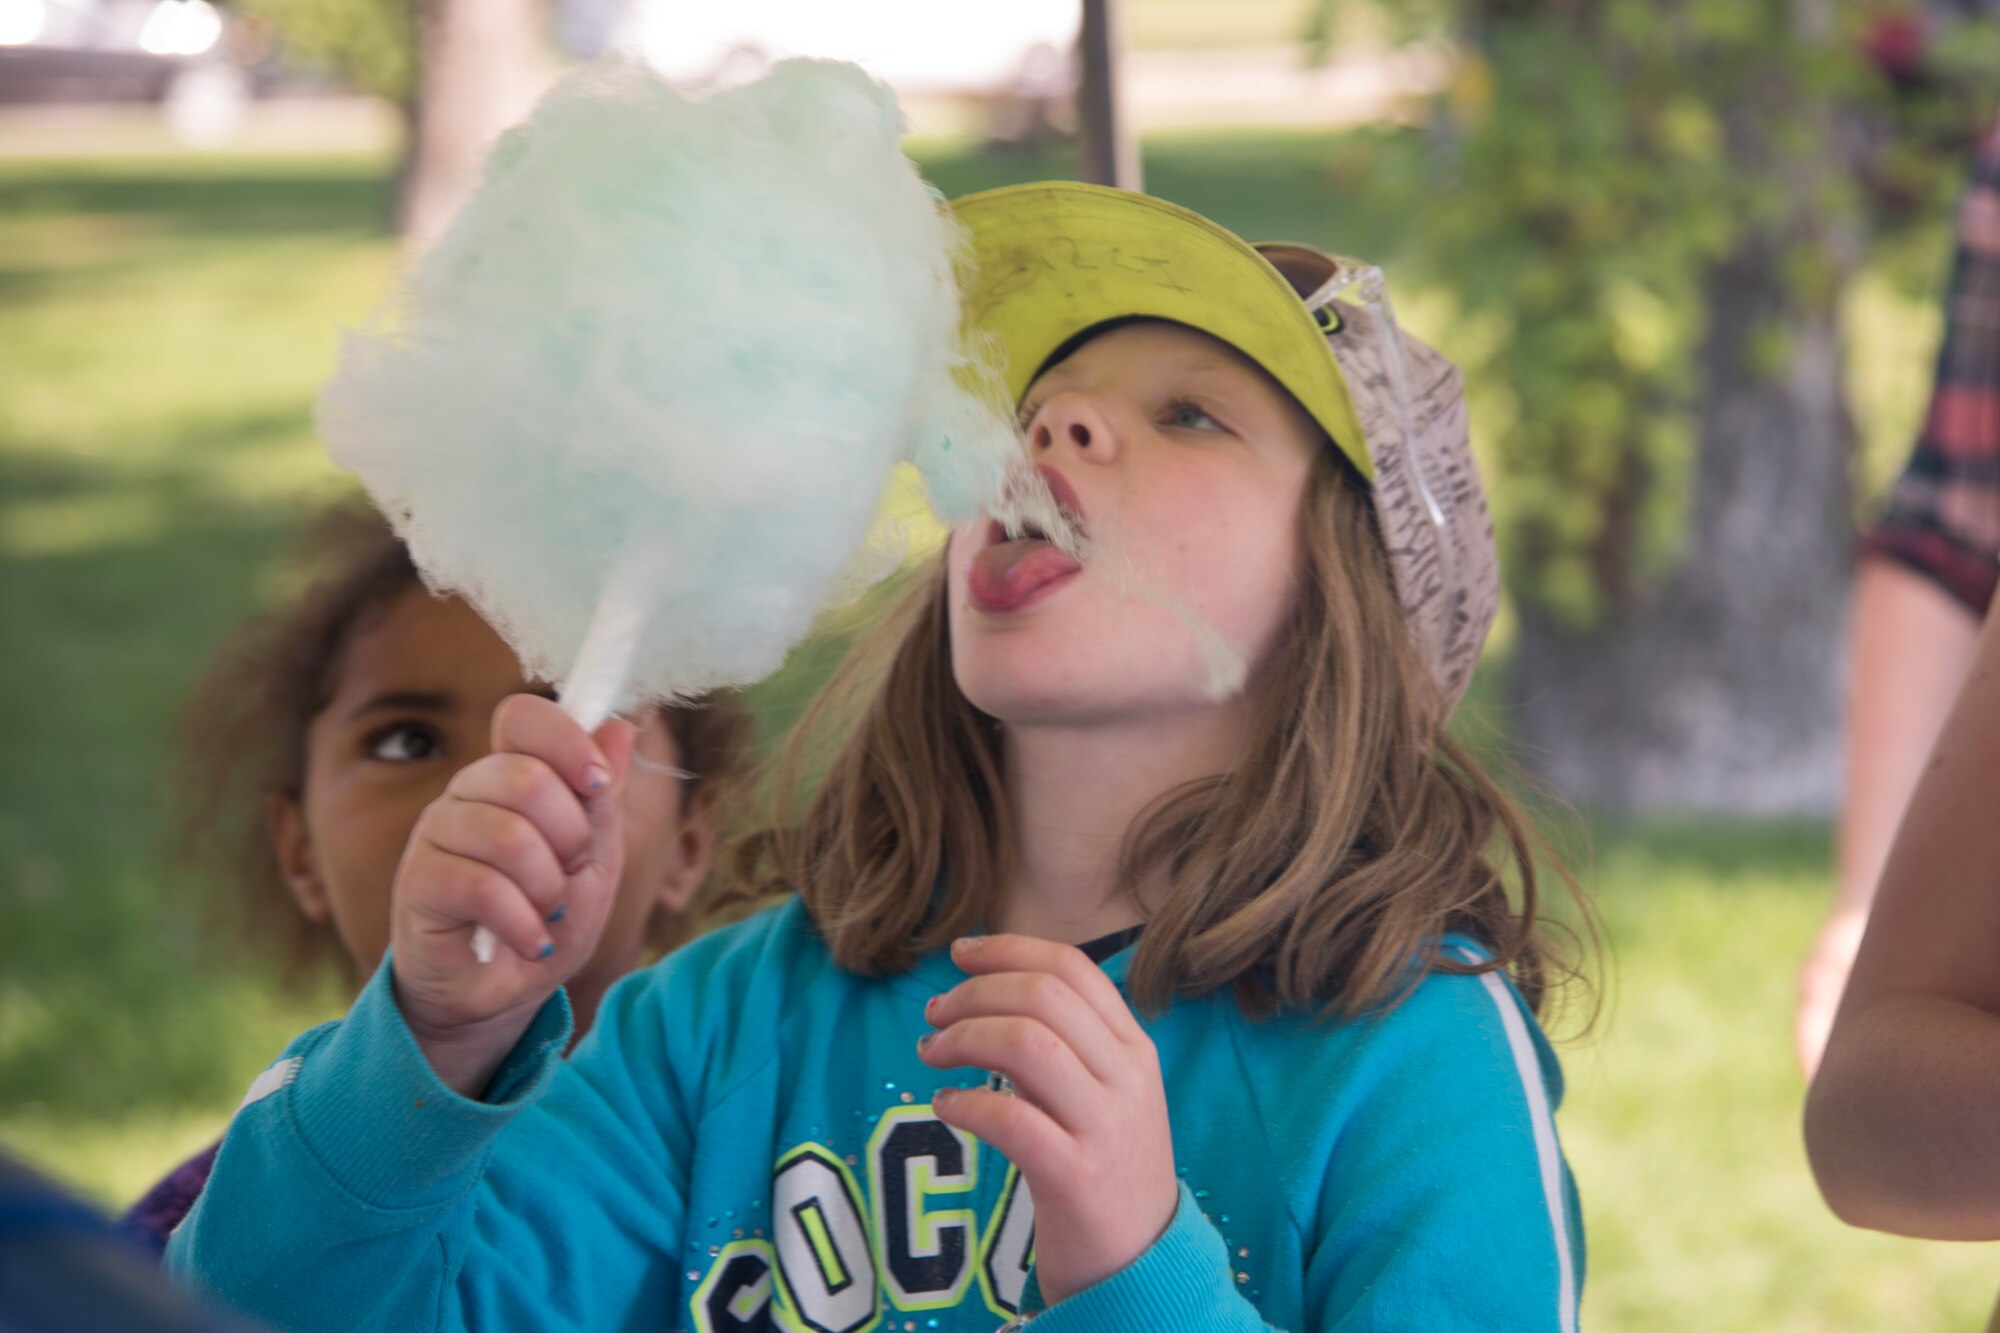 Kids enjoy free cotton candy at the 2018 Fairchild Food Truck Festival, Aug. 28, 2018, at Fairchild Air Force Base, Washington. The base has a decades-long history of offering a yearly picnic for its Airmen, but members of the 92nd Force Support Squadron reached out to the local community to make it better with the first Food Truck Festival in 2016. (U.S. Air Force photo/ Senior Airman Ryan Lackey)